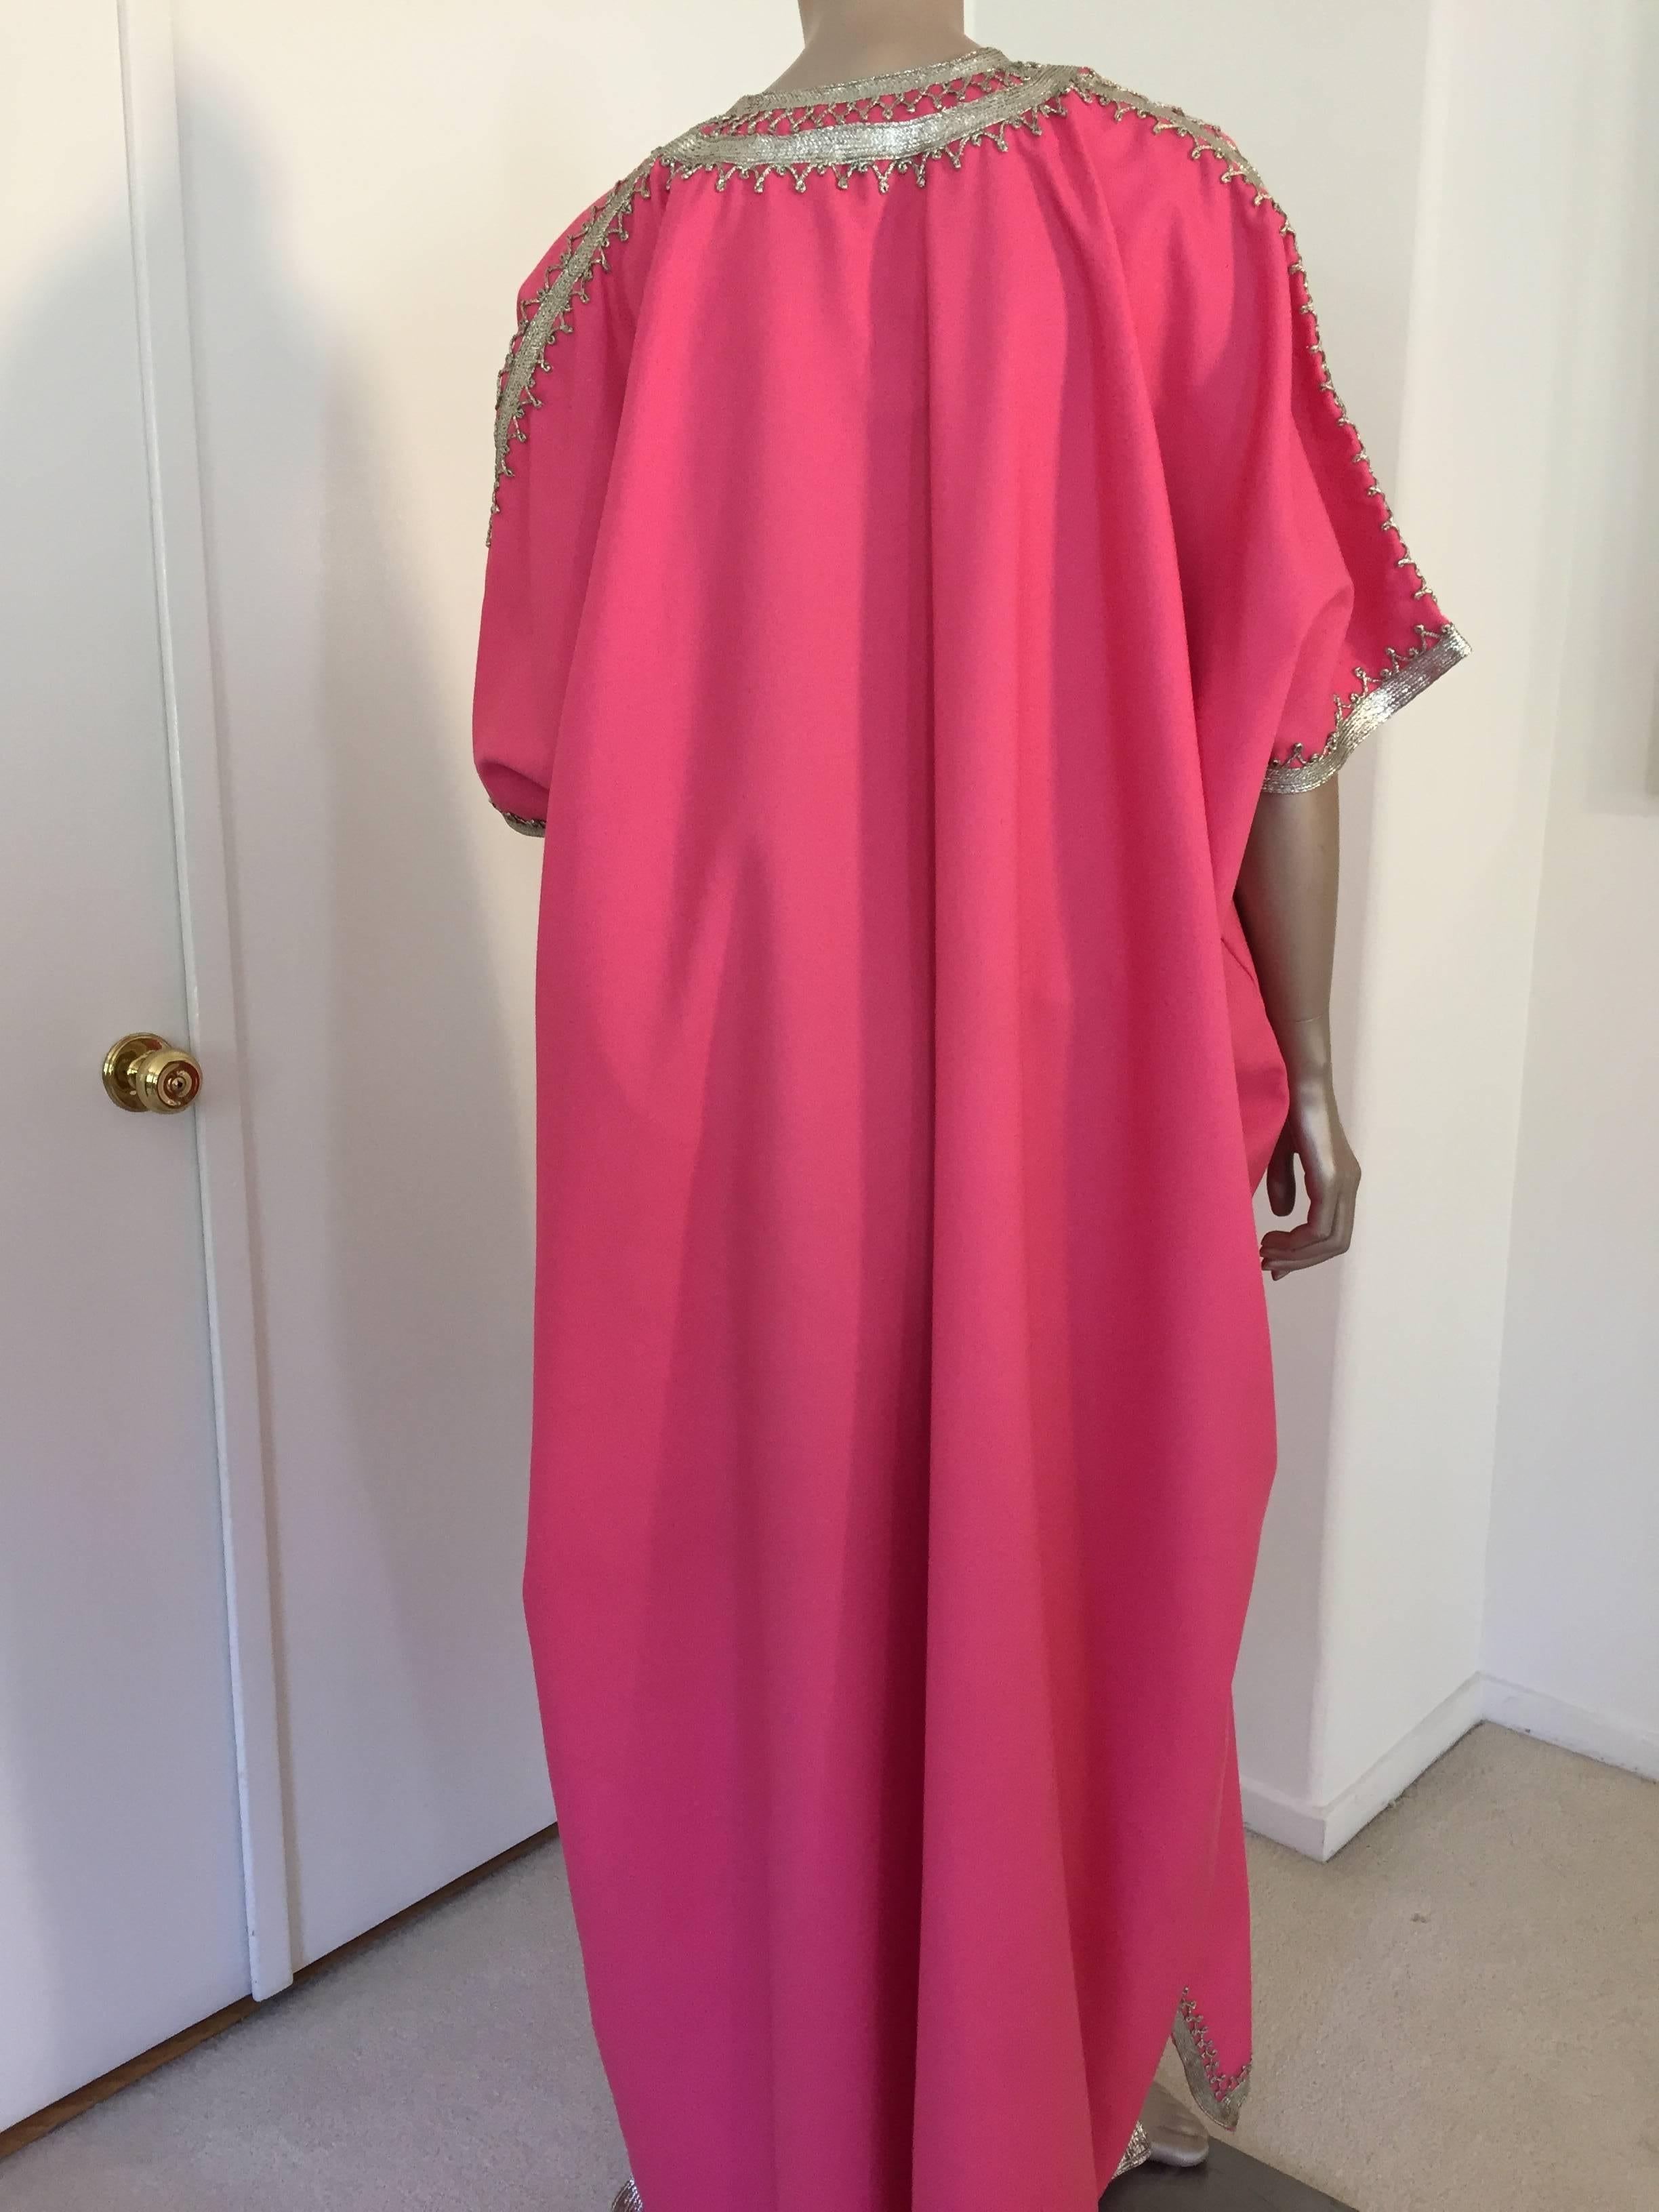 Moroccan Caftan Hot Pink Color Embroidered with Silver, Kaftan circa 1970 For Sale 1